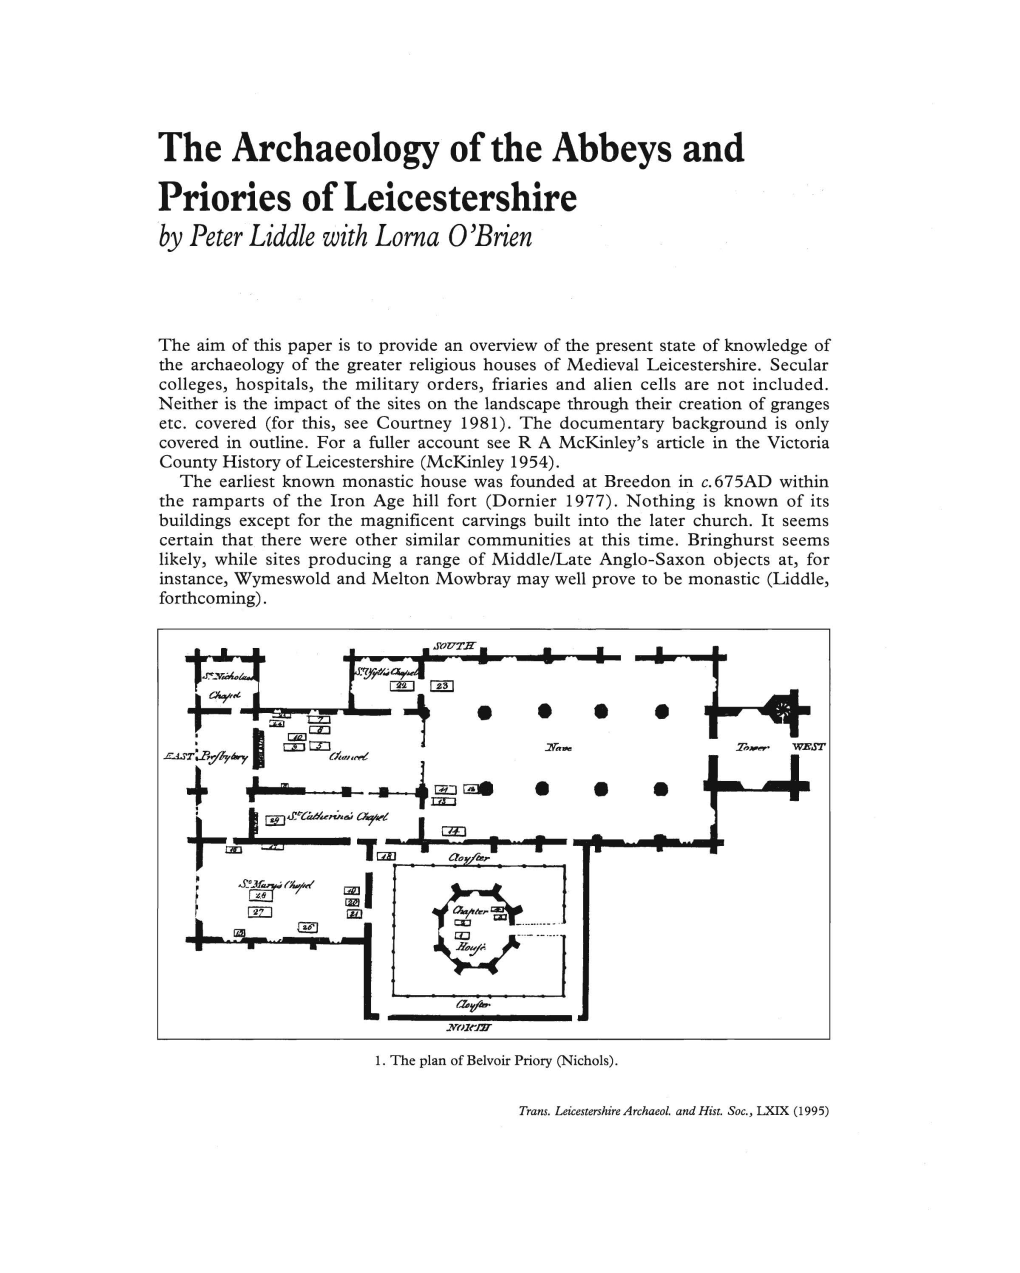 The Archaeology of the Abbeys and Priories of Leicestershire Pp.1-21